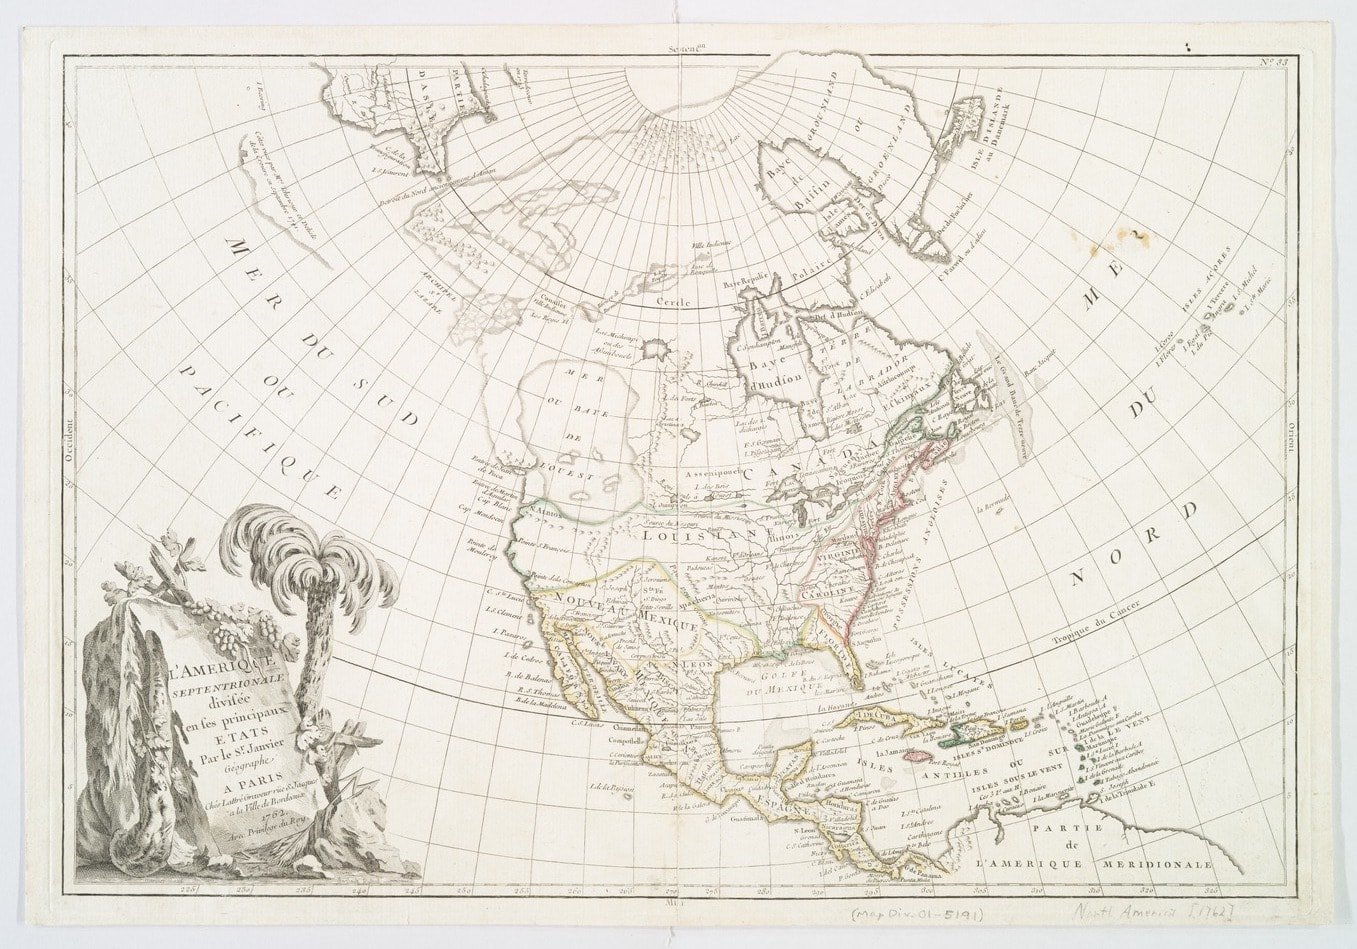 1762 map of the Americas